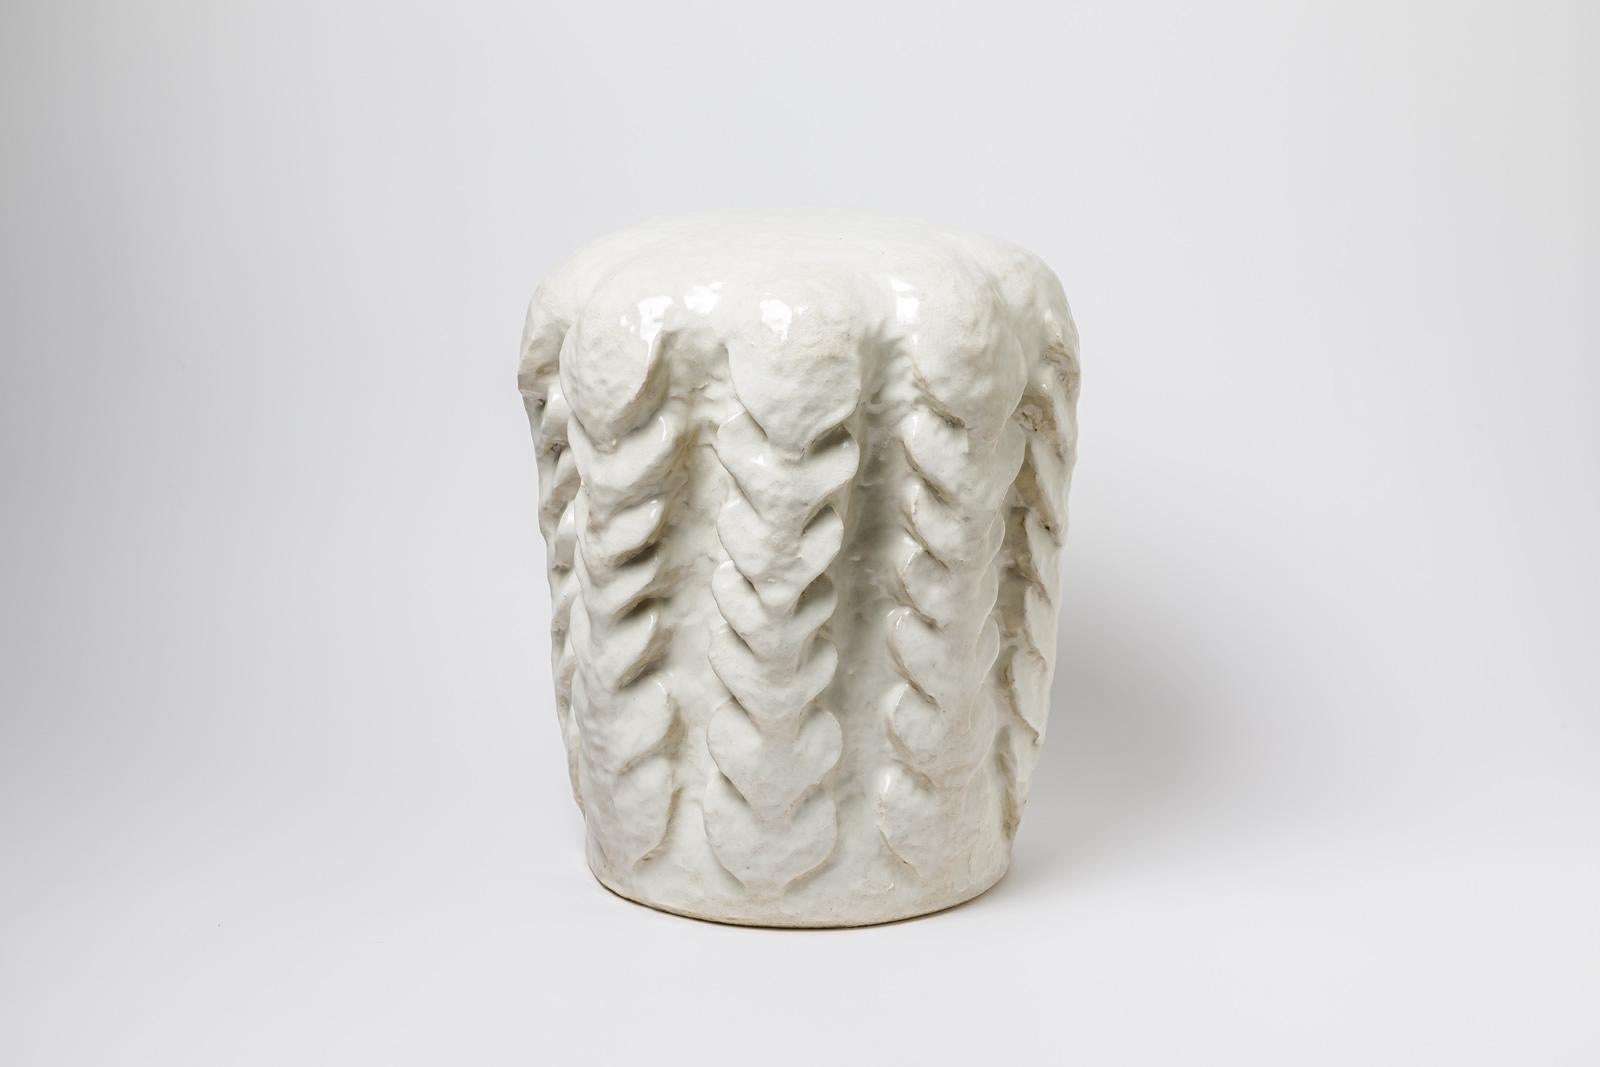 French Sculptural stool 